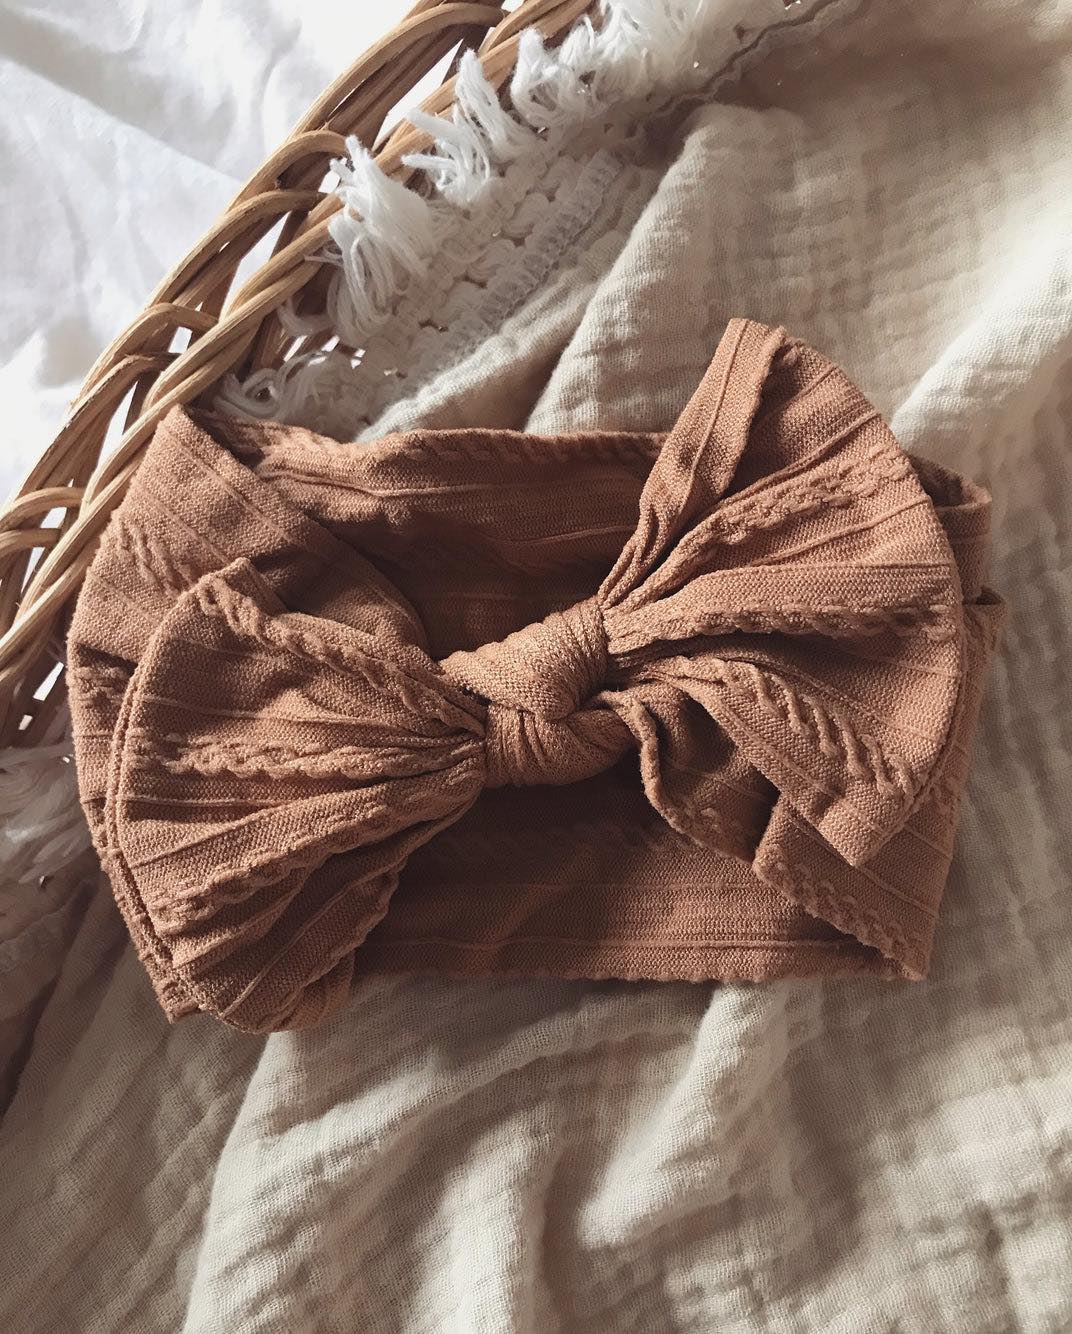 Cable Knit Bow Stretchy Head Hairband - loveindi.ie